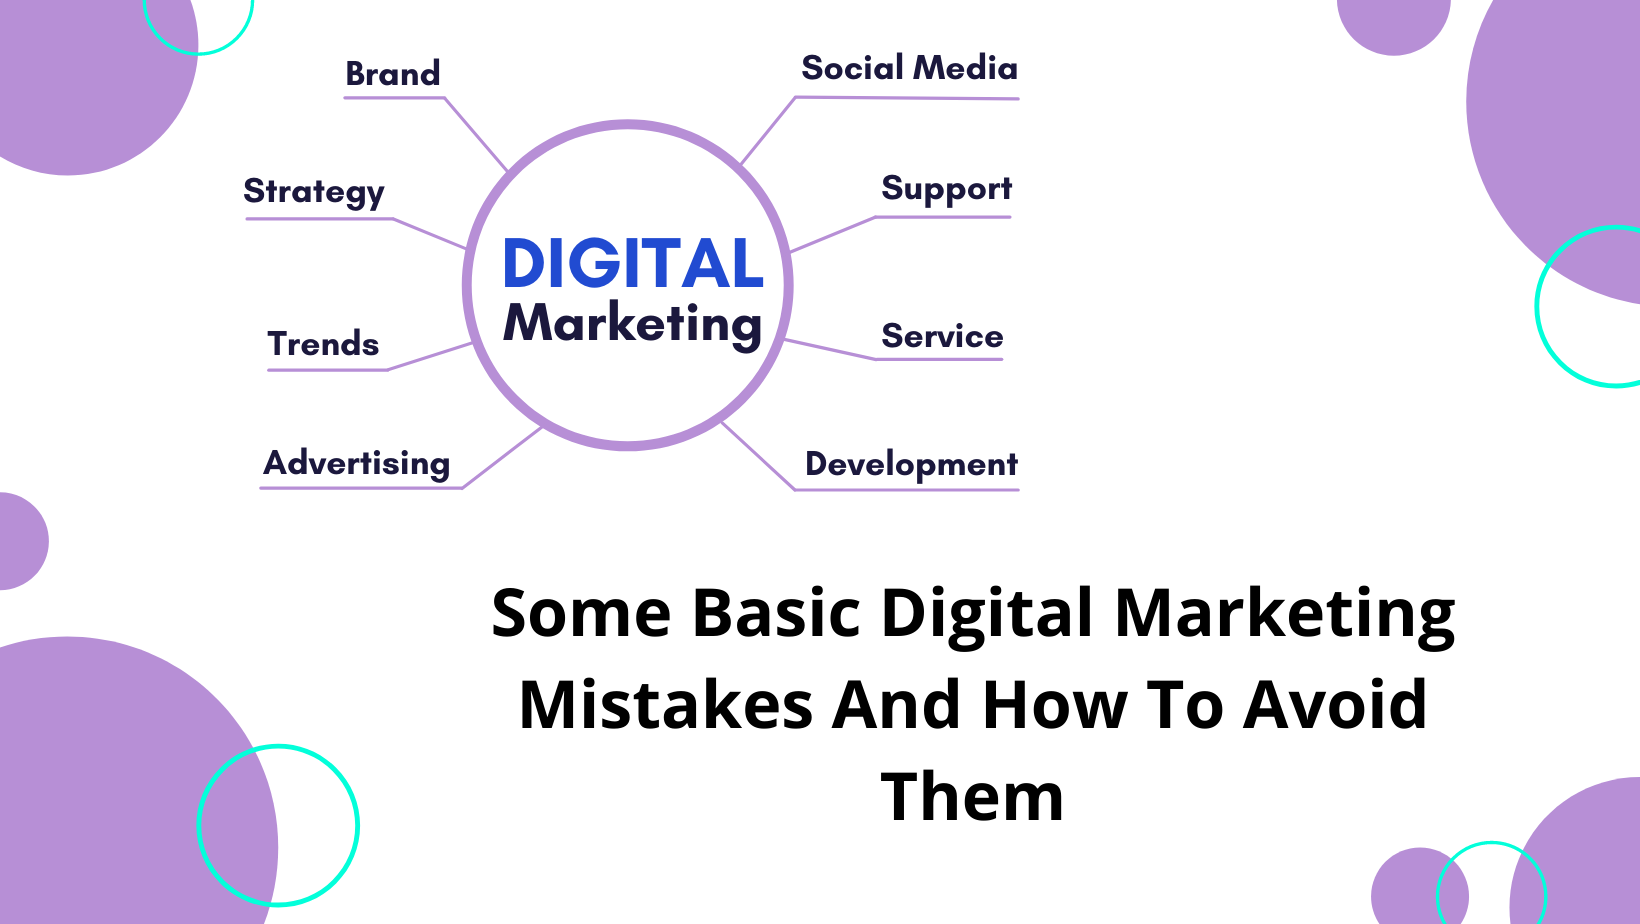 Some Basic Digital Marketing Mistakes And How To Avoid Them